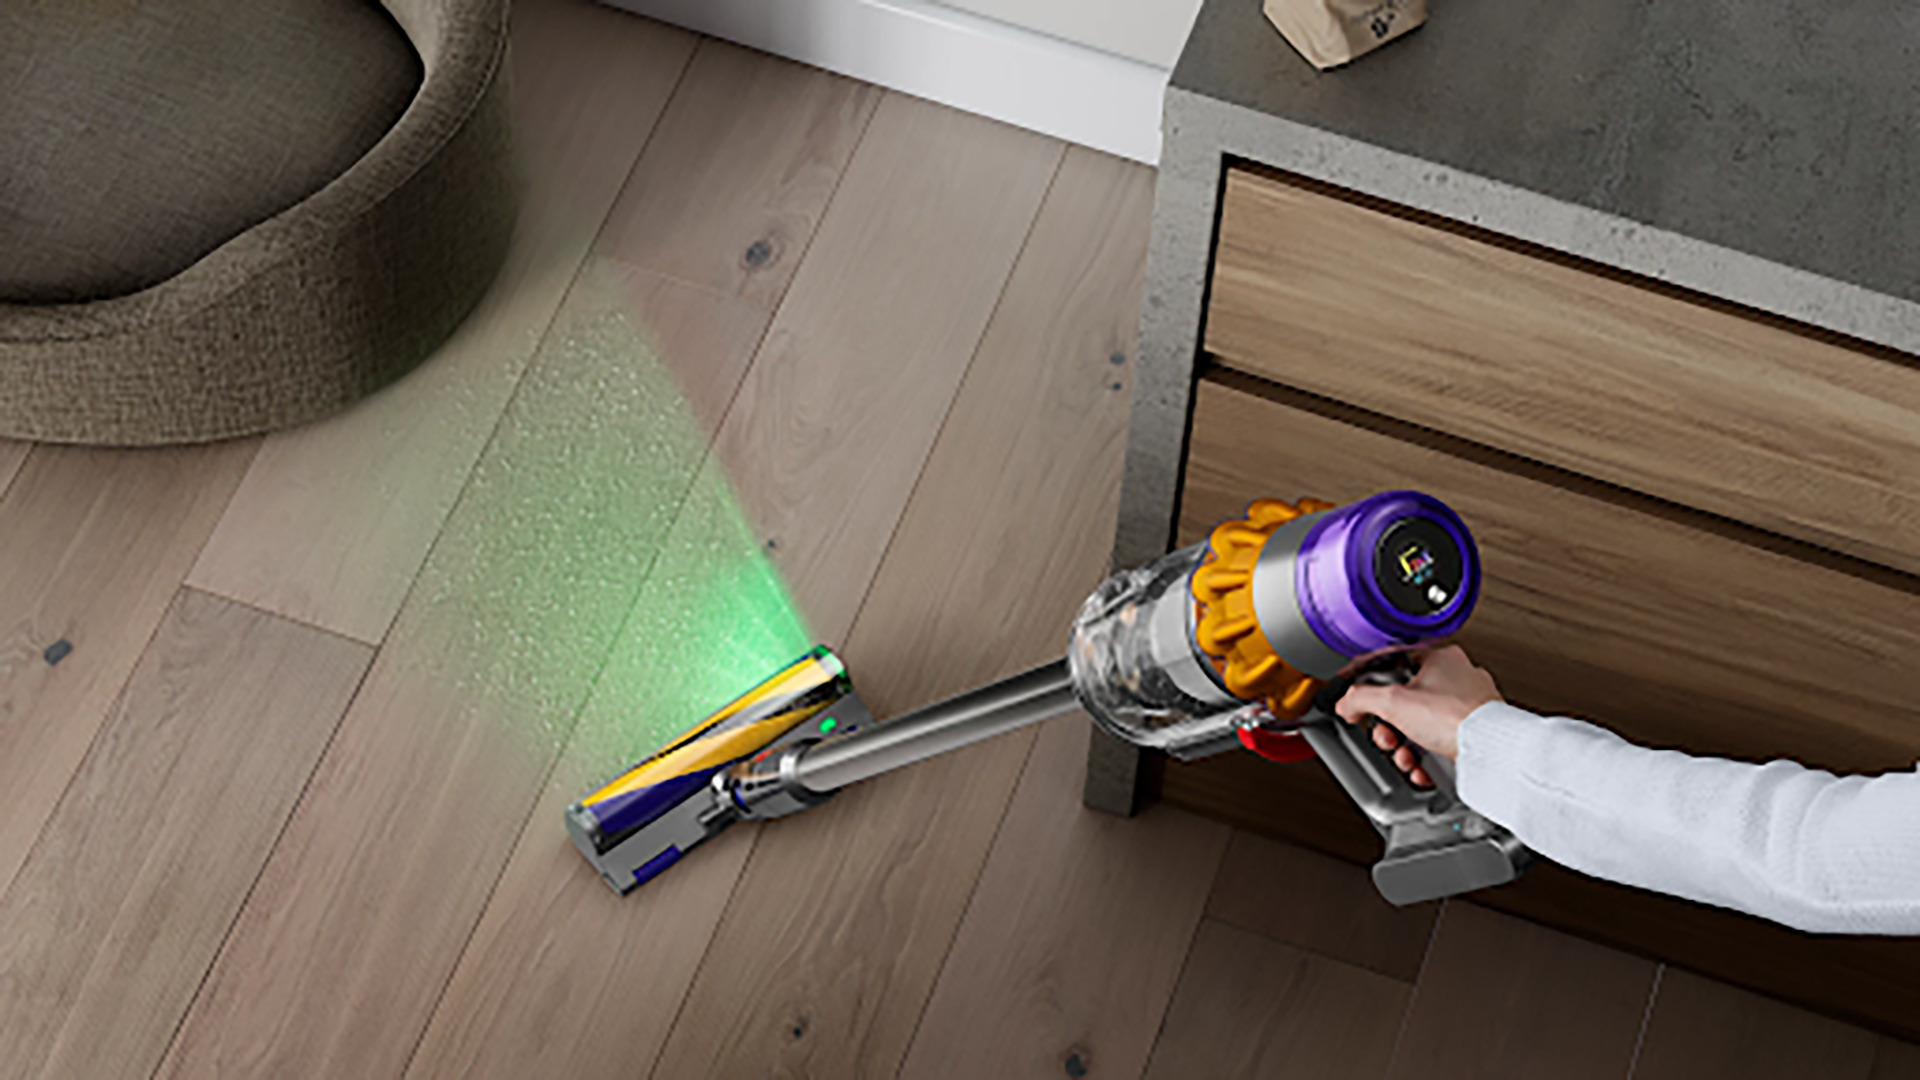 Dyson stick cordless vacuum used on wood floors with a green light.